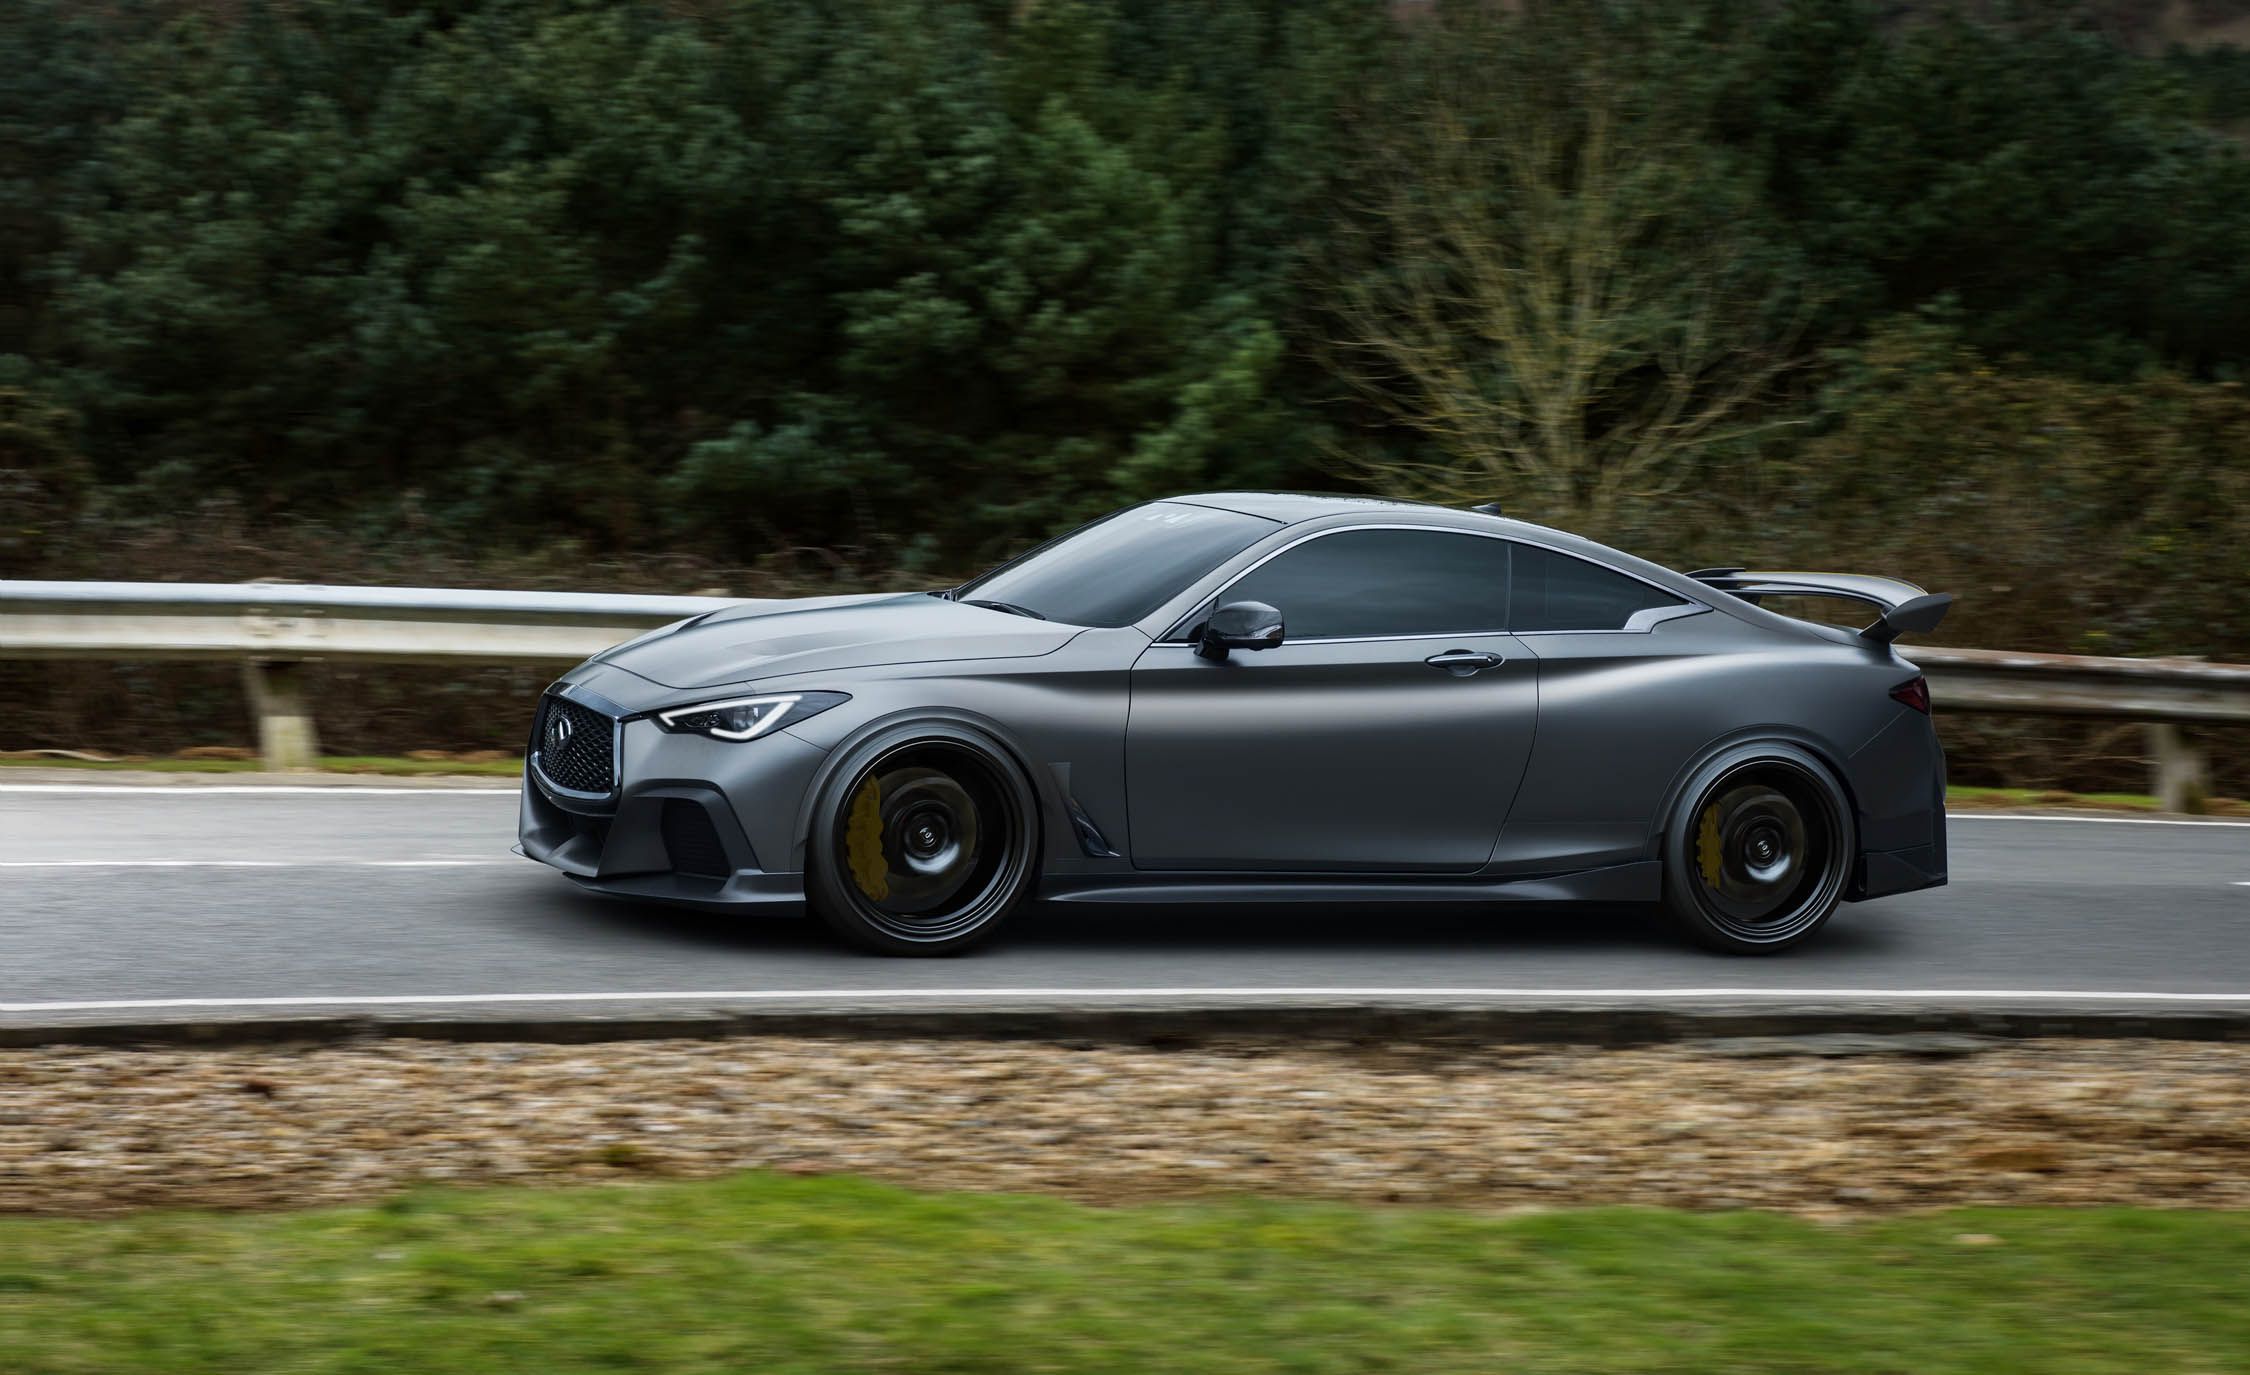 Is the Project Black S Prototype the Infiniti We've Been Waiting For?